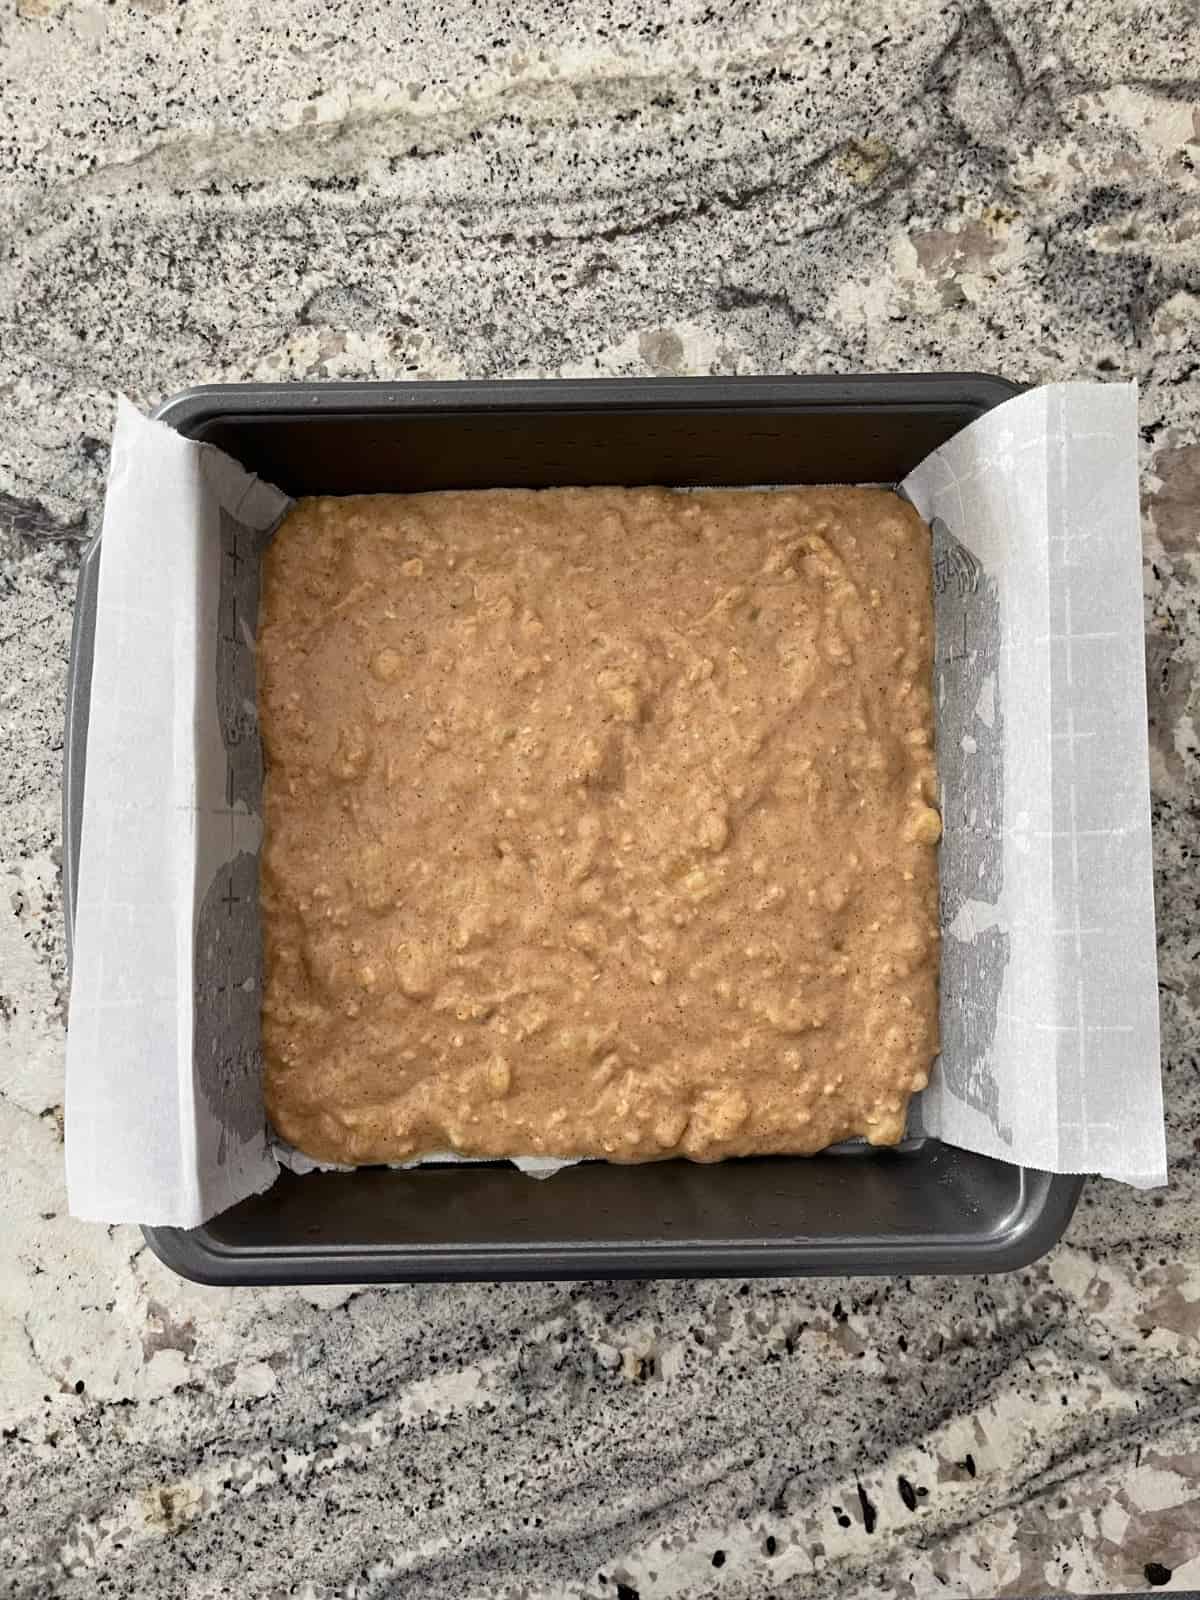 Unbaked banana bread batter in parchment lined baking pan on granite counter.